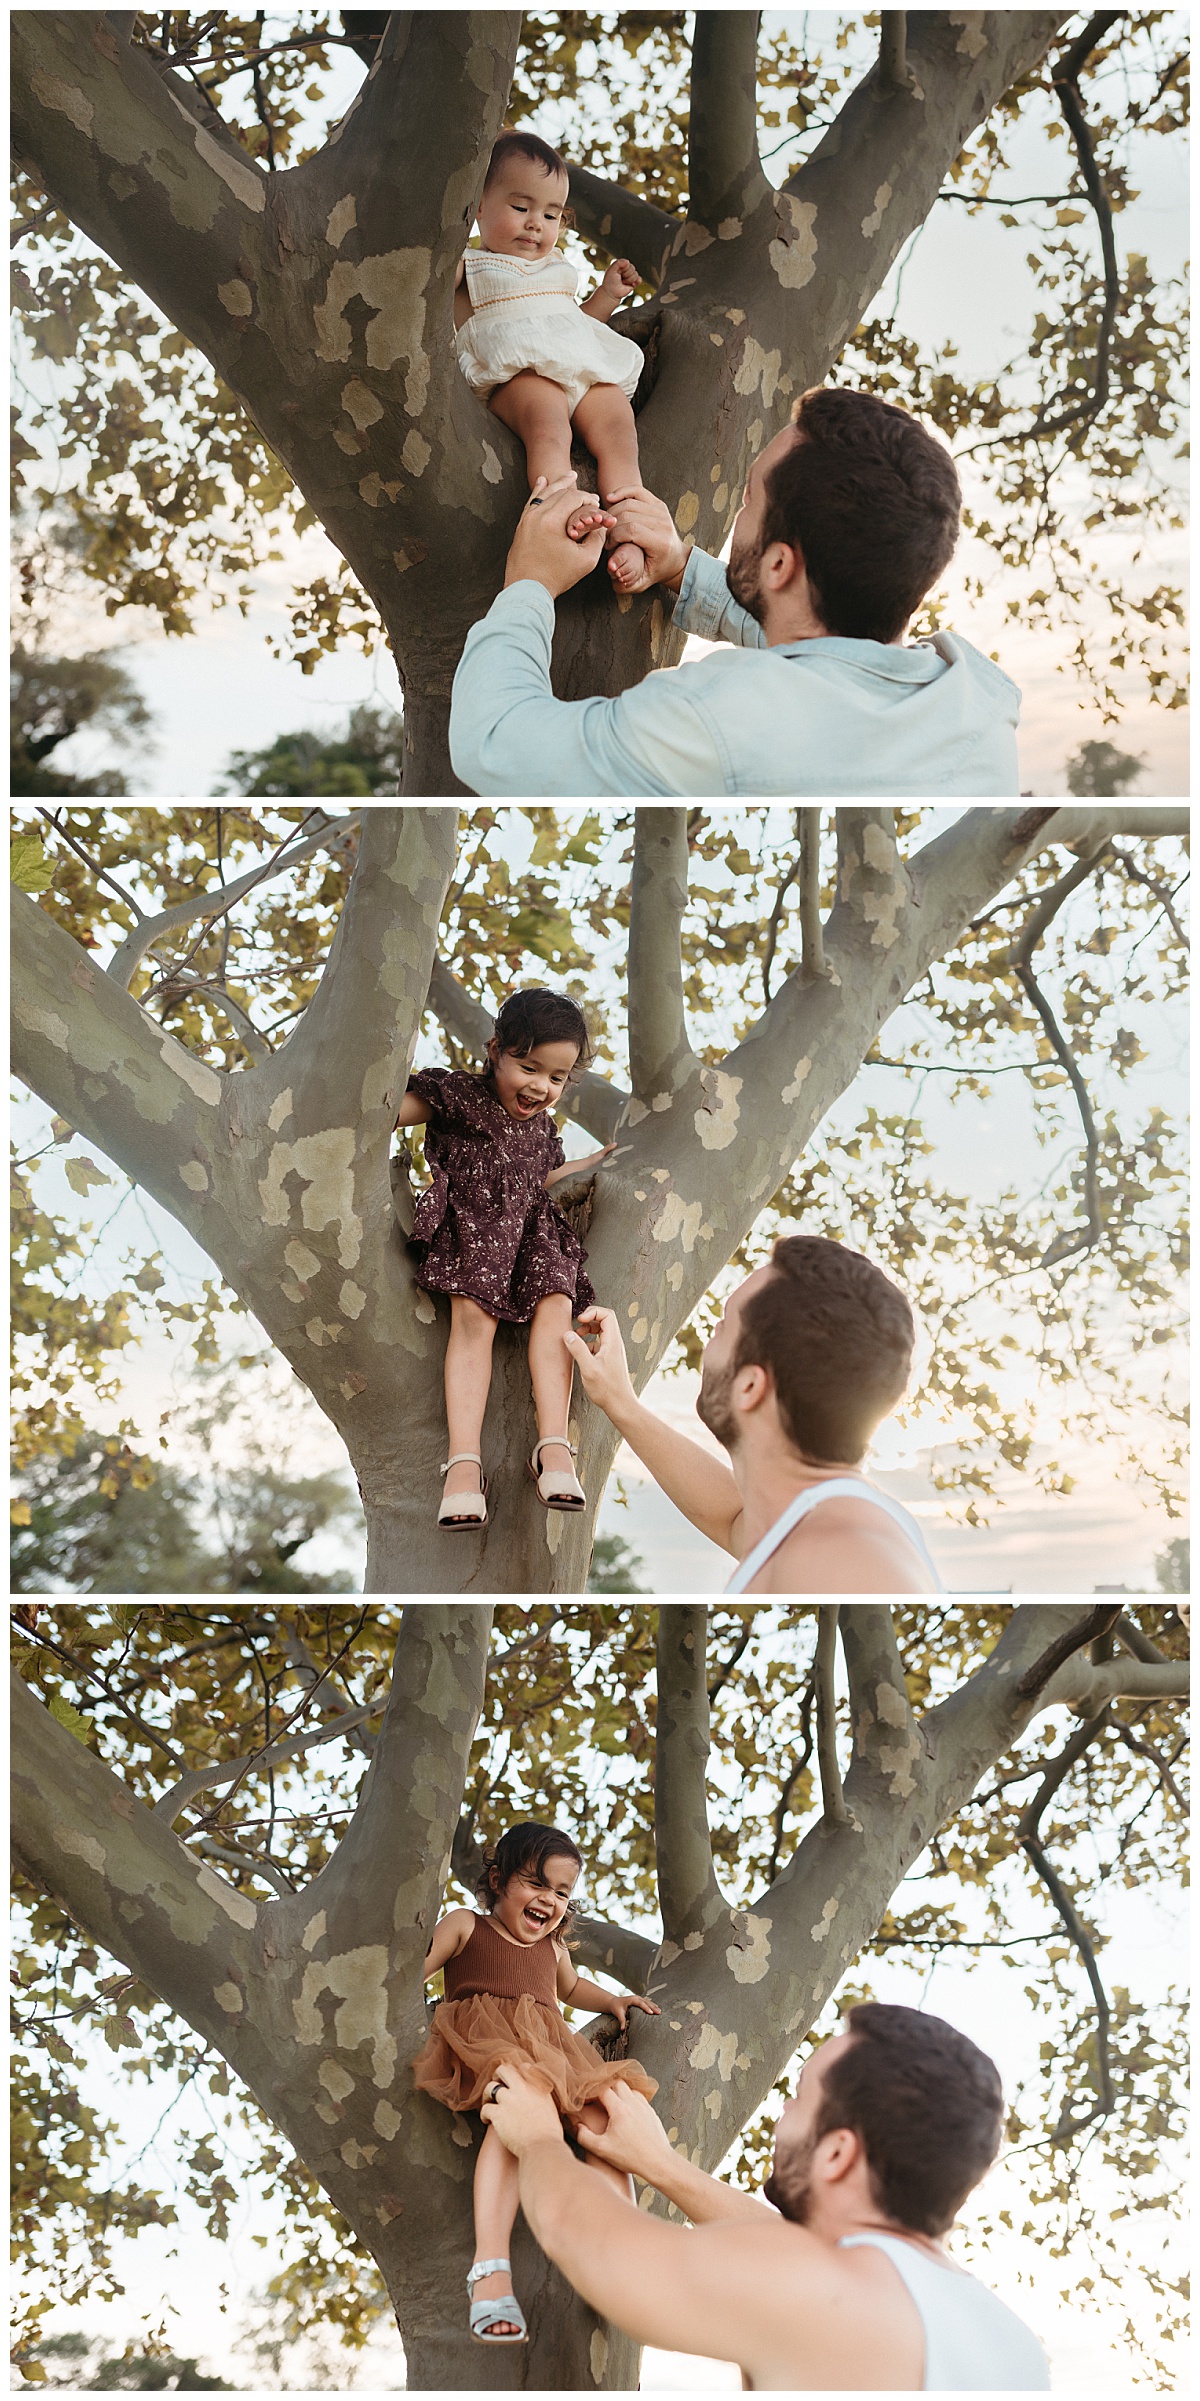 girls sit in tree as dad stands below ready to catch them by Virginia Beach photographer